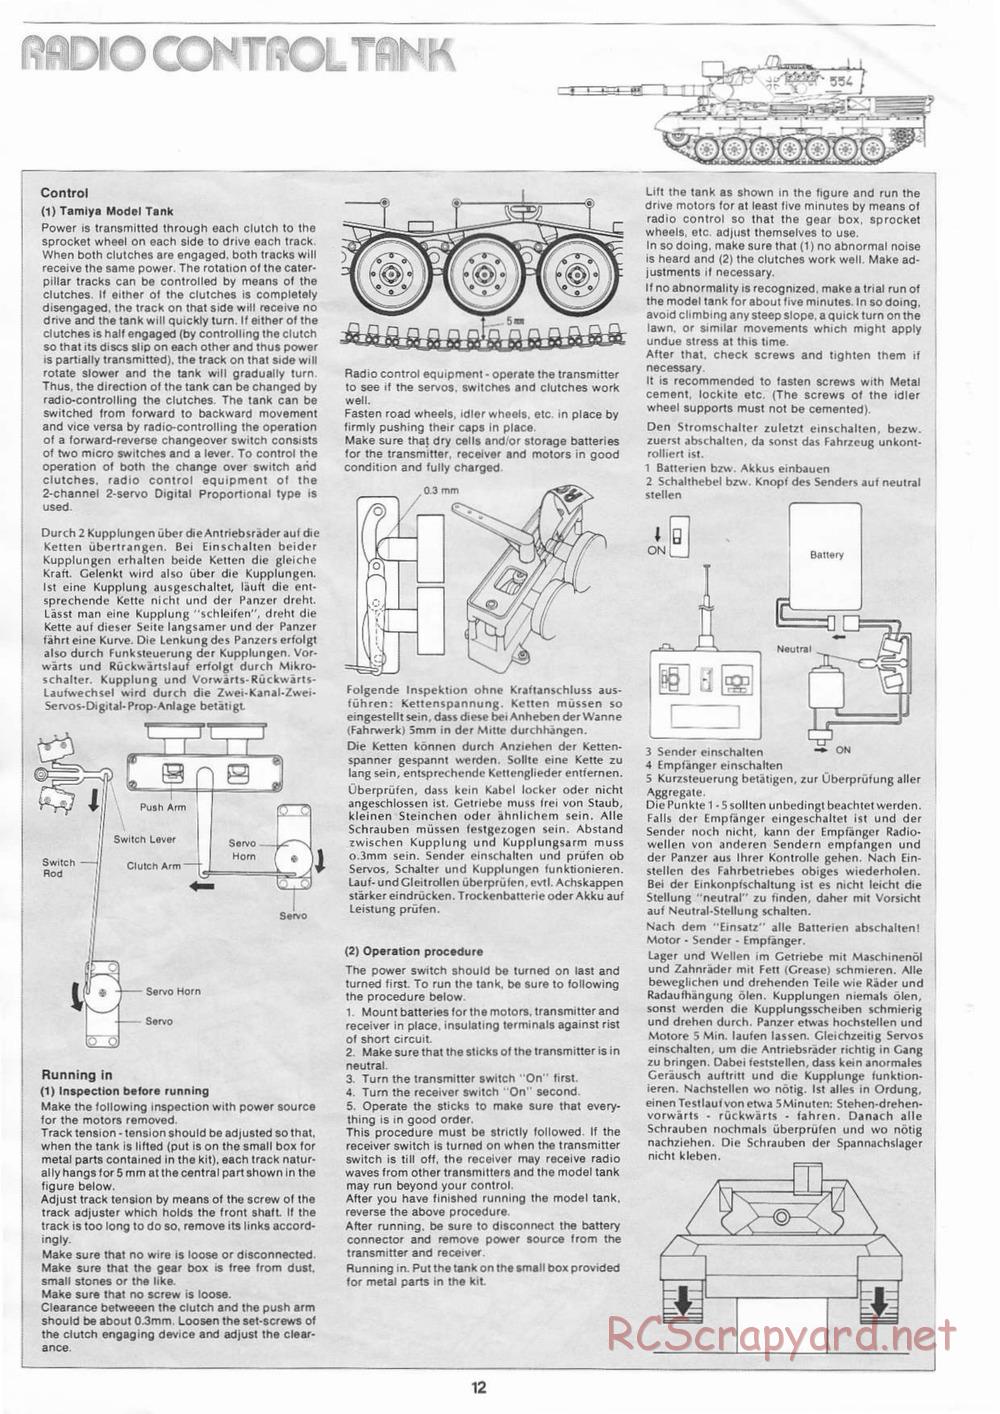 Tamiya - Leopard A4 - 1/16 Scale Chassis - Manual - Page 12